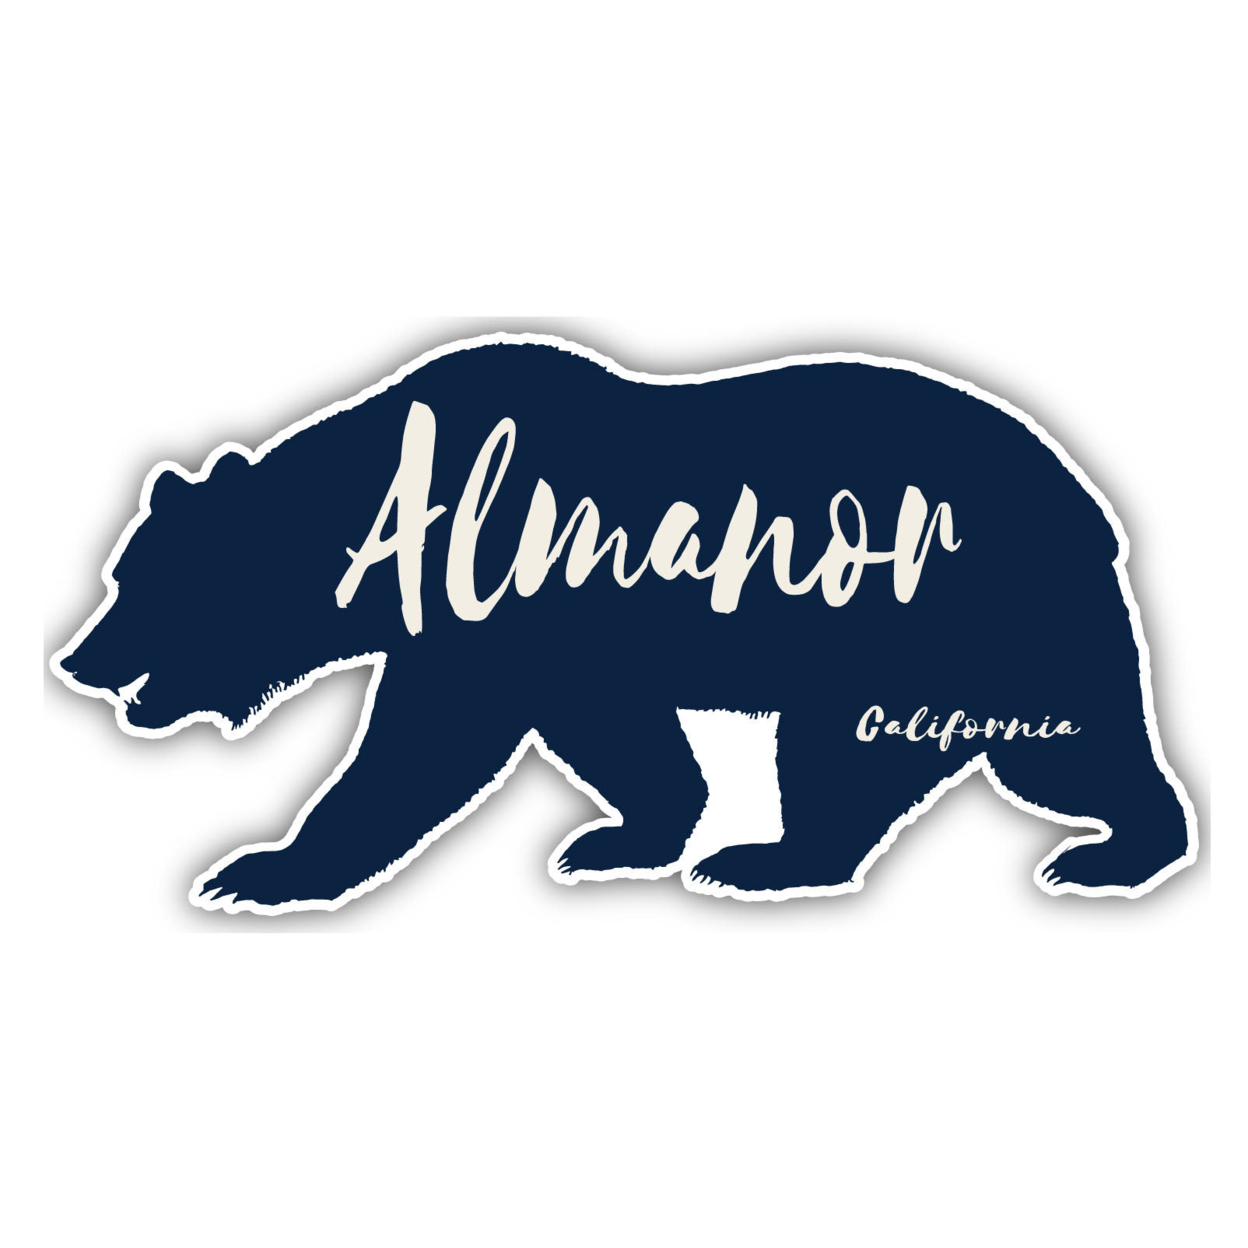 Almanor California Souvenir Decorative Stickers (Choose Theme And Size) - 4-Pack, 4-Inch, Bear